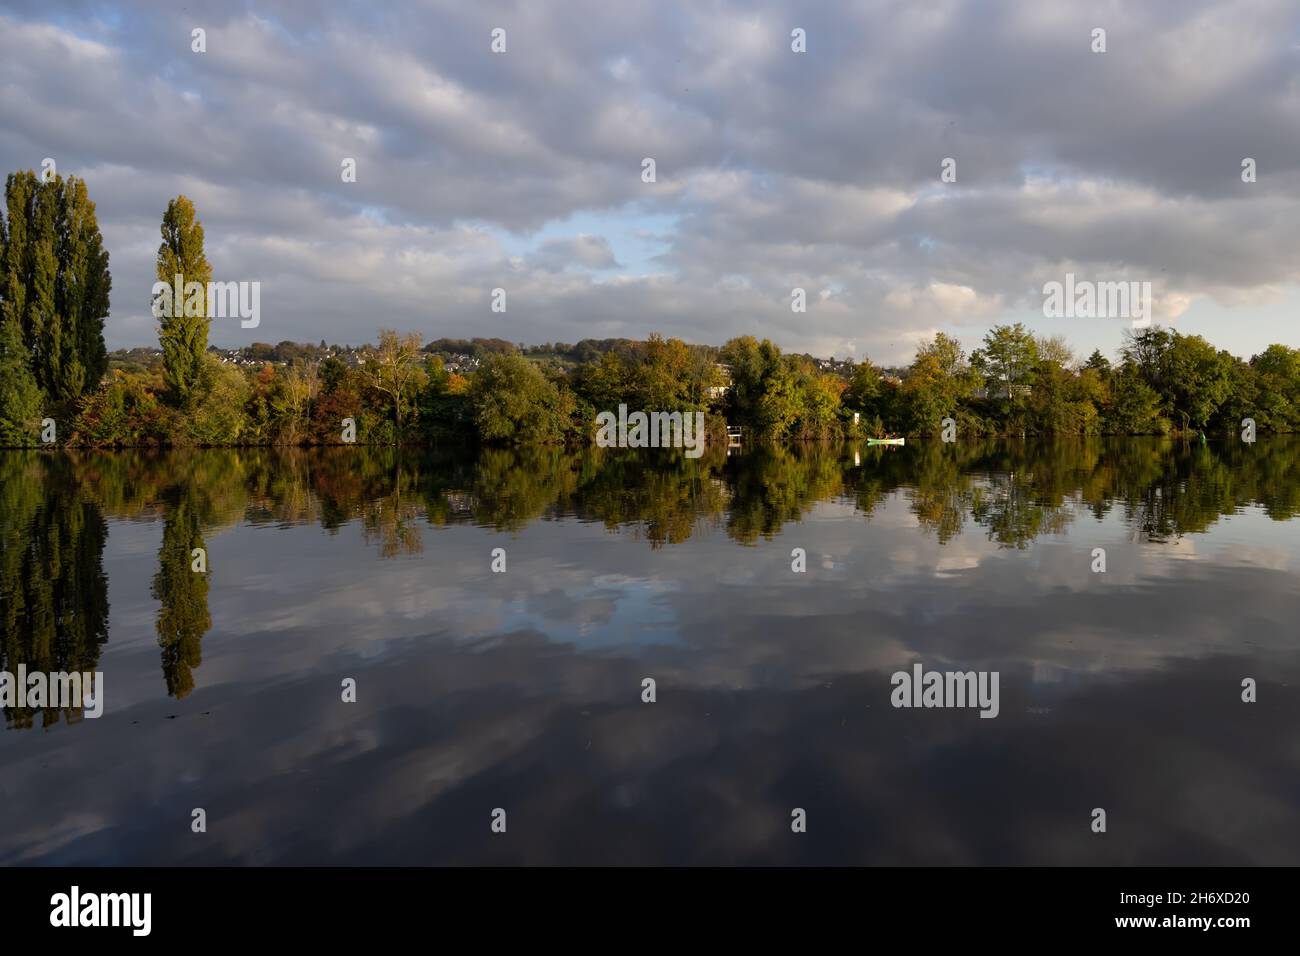 View over the Ruhr-river on the district of Essen Kupferdreh in Germany. The landscape is reflecting in the water. Typical autumn panorama. Stock Photo